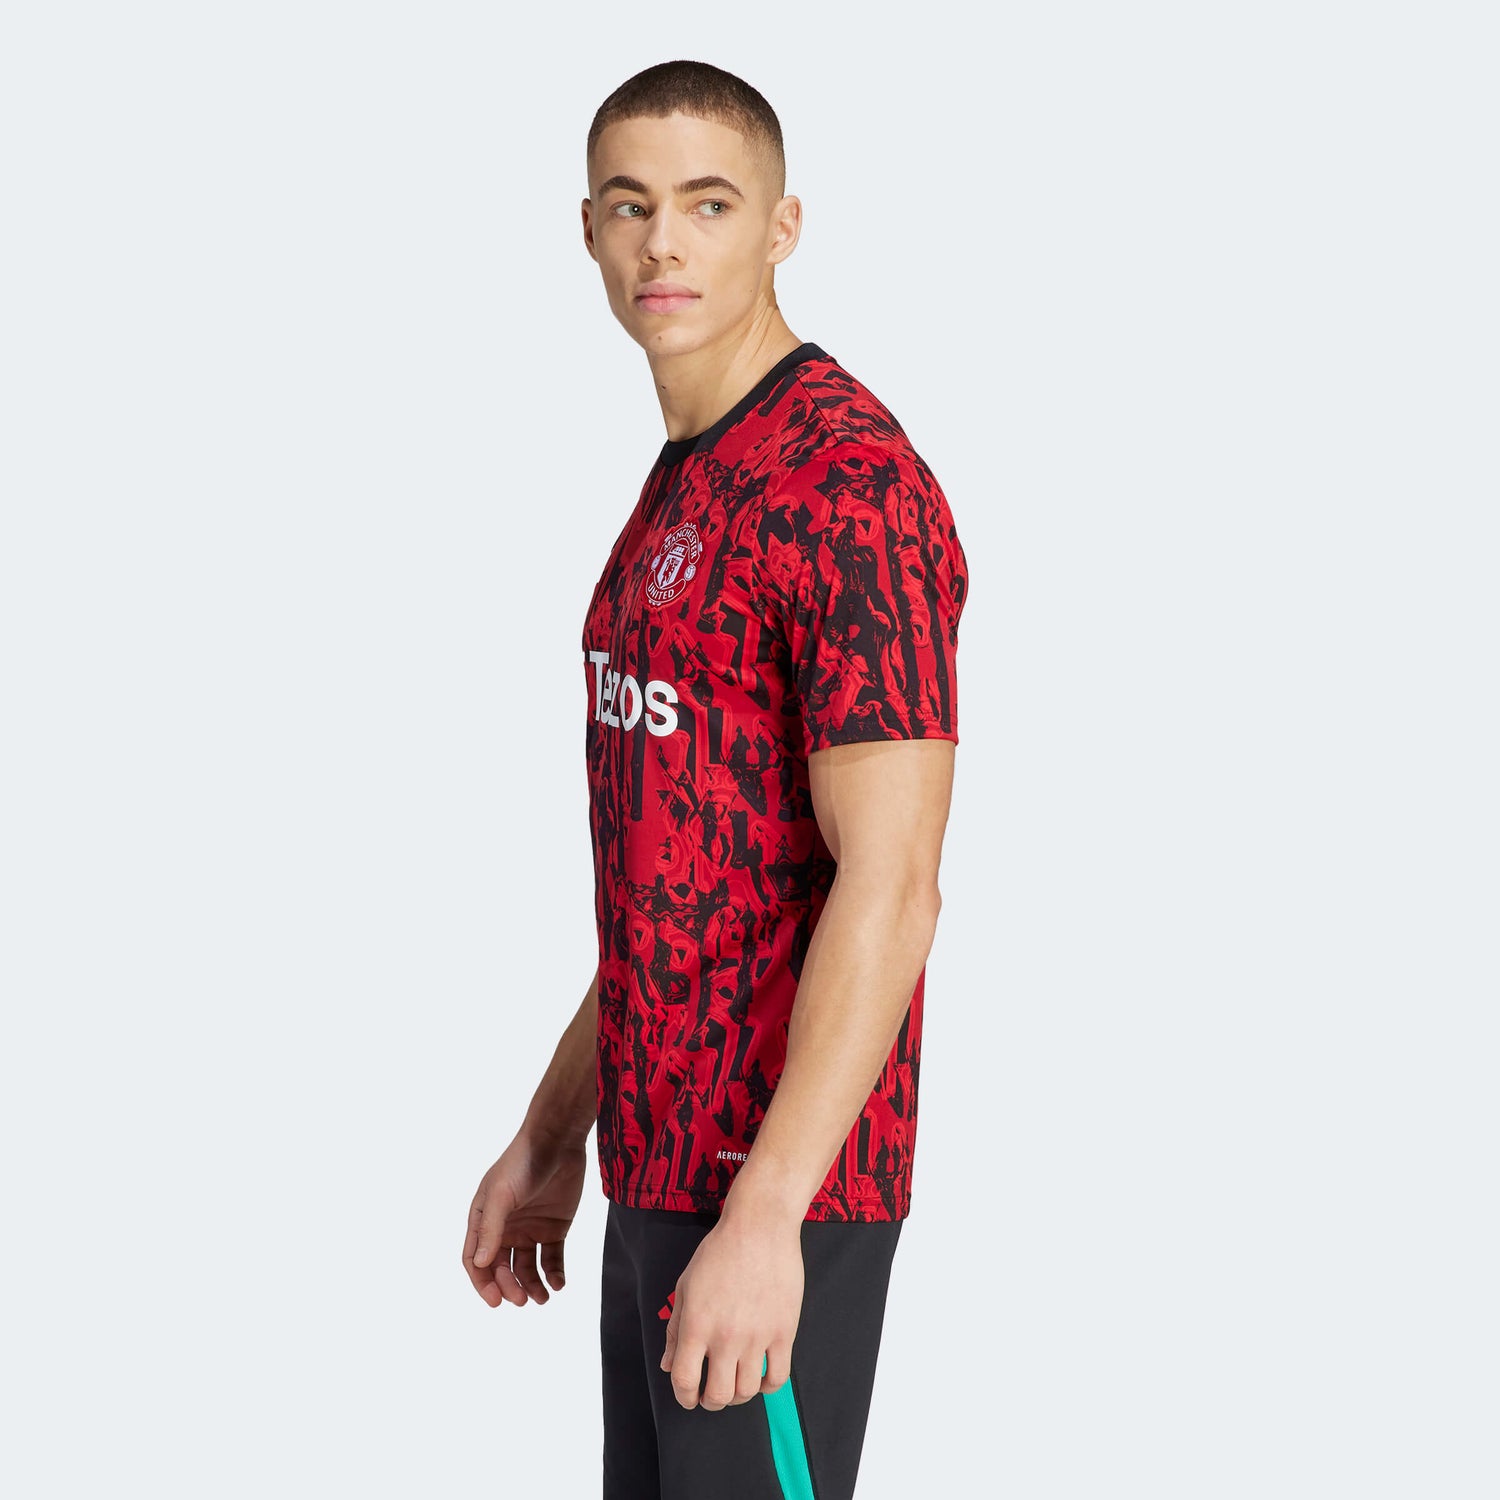 Manchester United Pre-Match Jersey